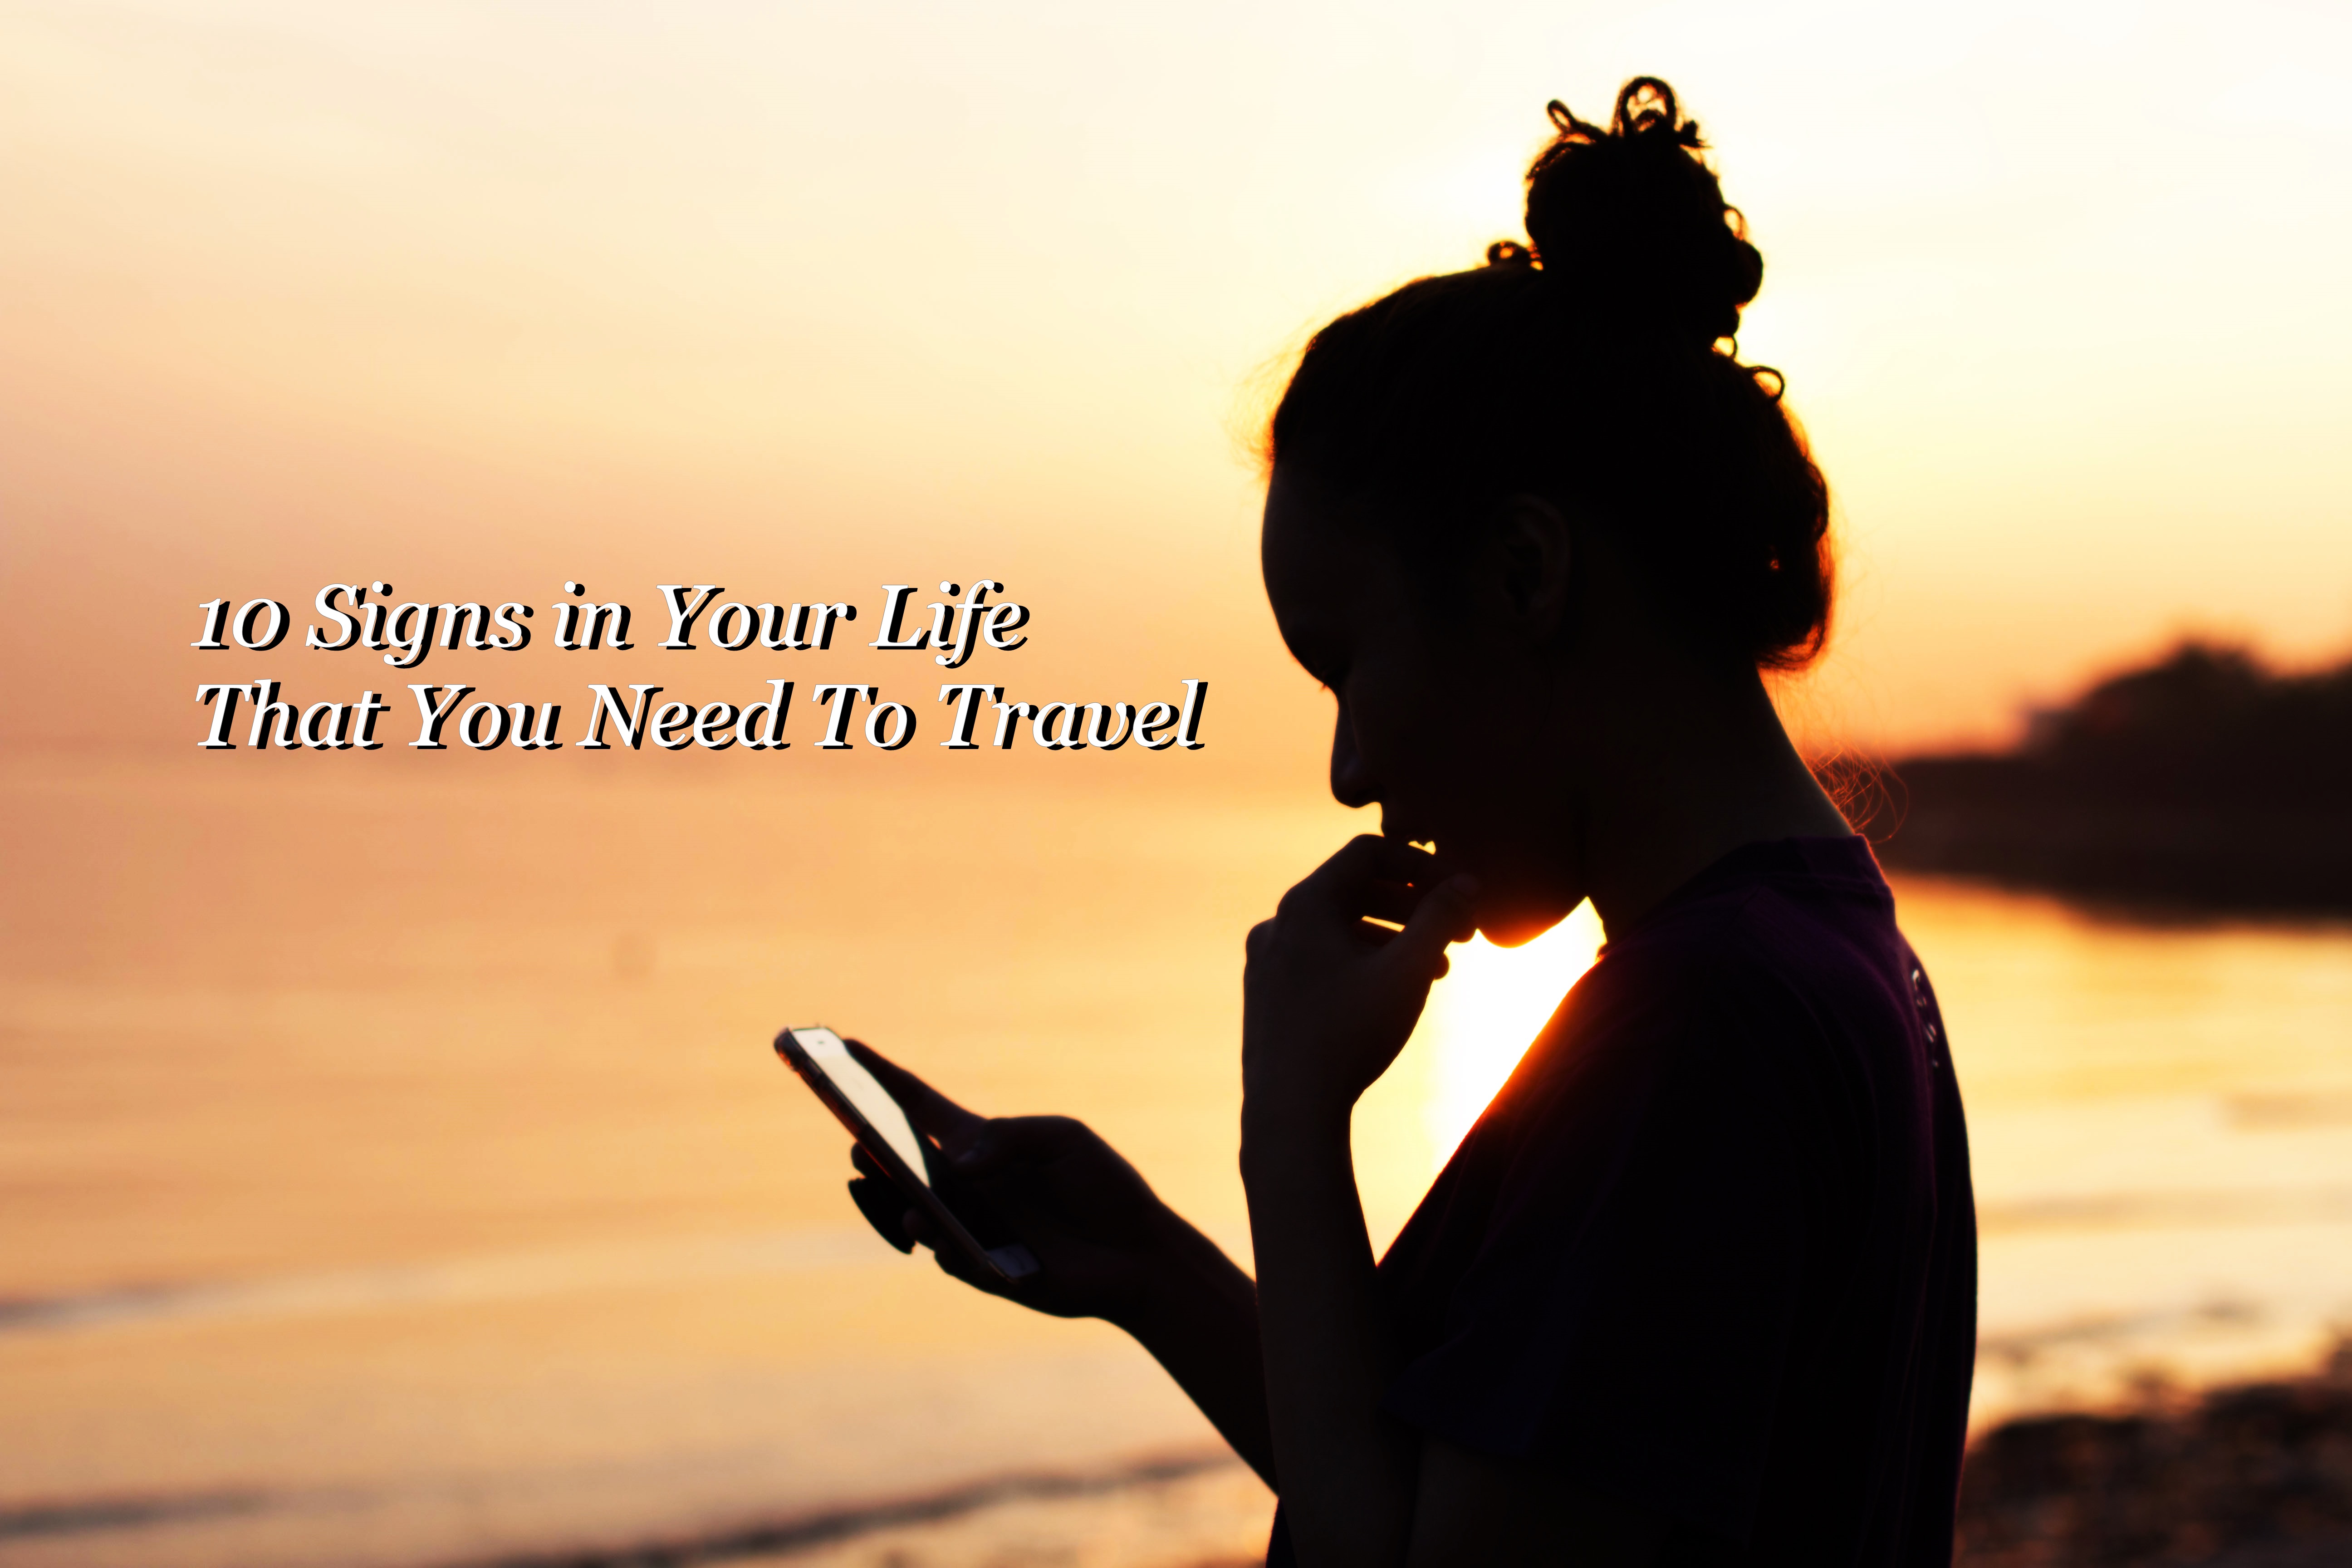 10 Signs in Your Life That You Need to Travel